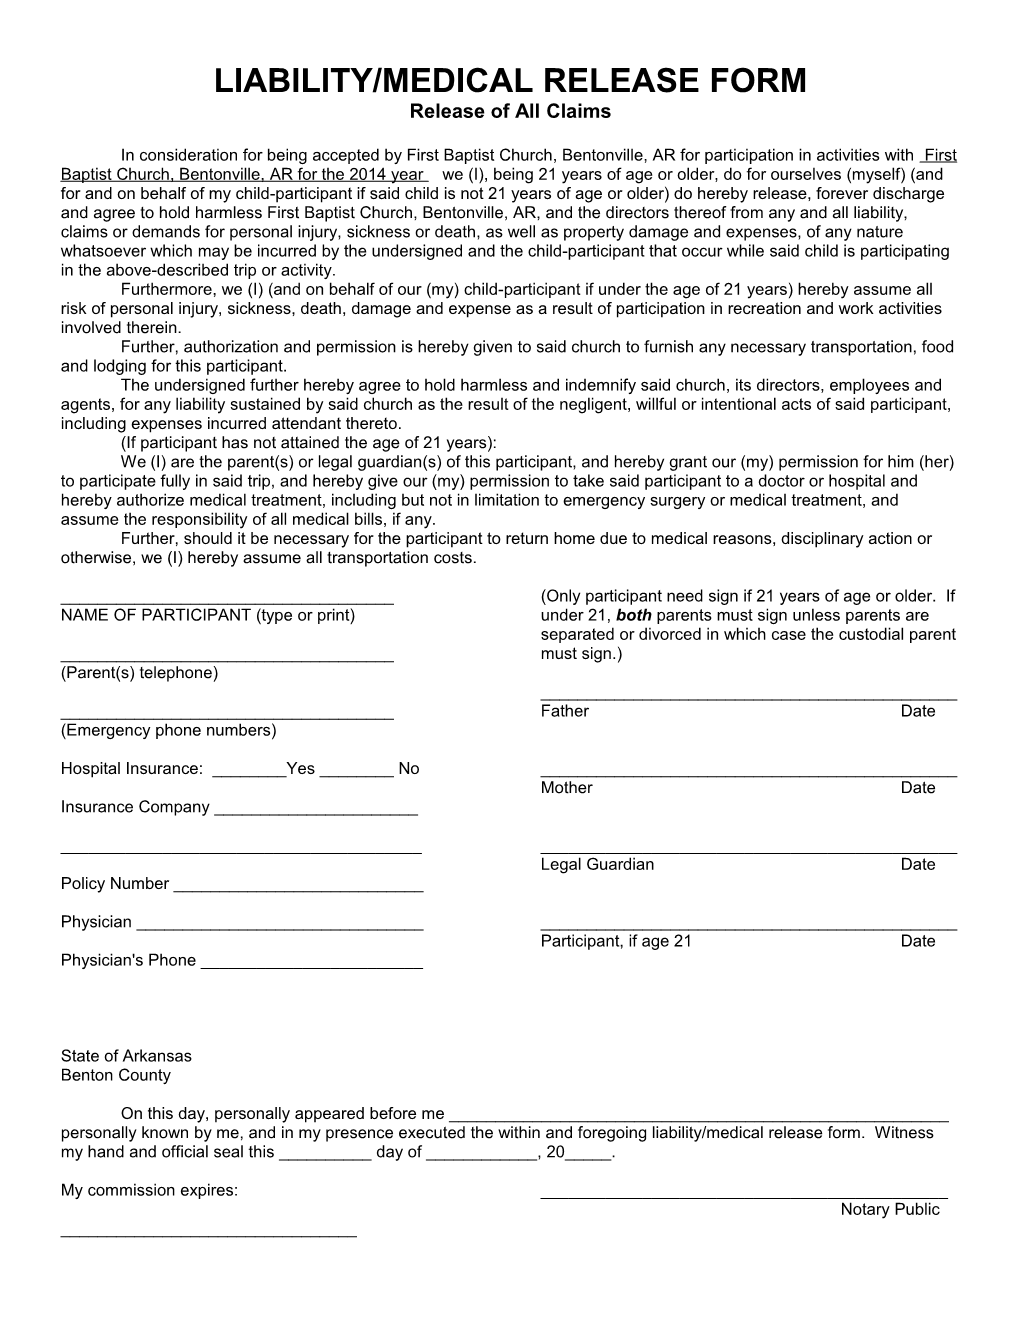 Liability/Medical Release Form